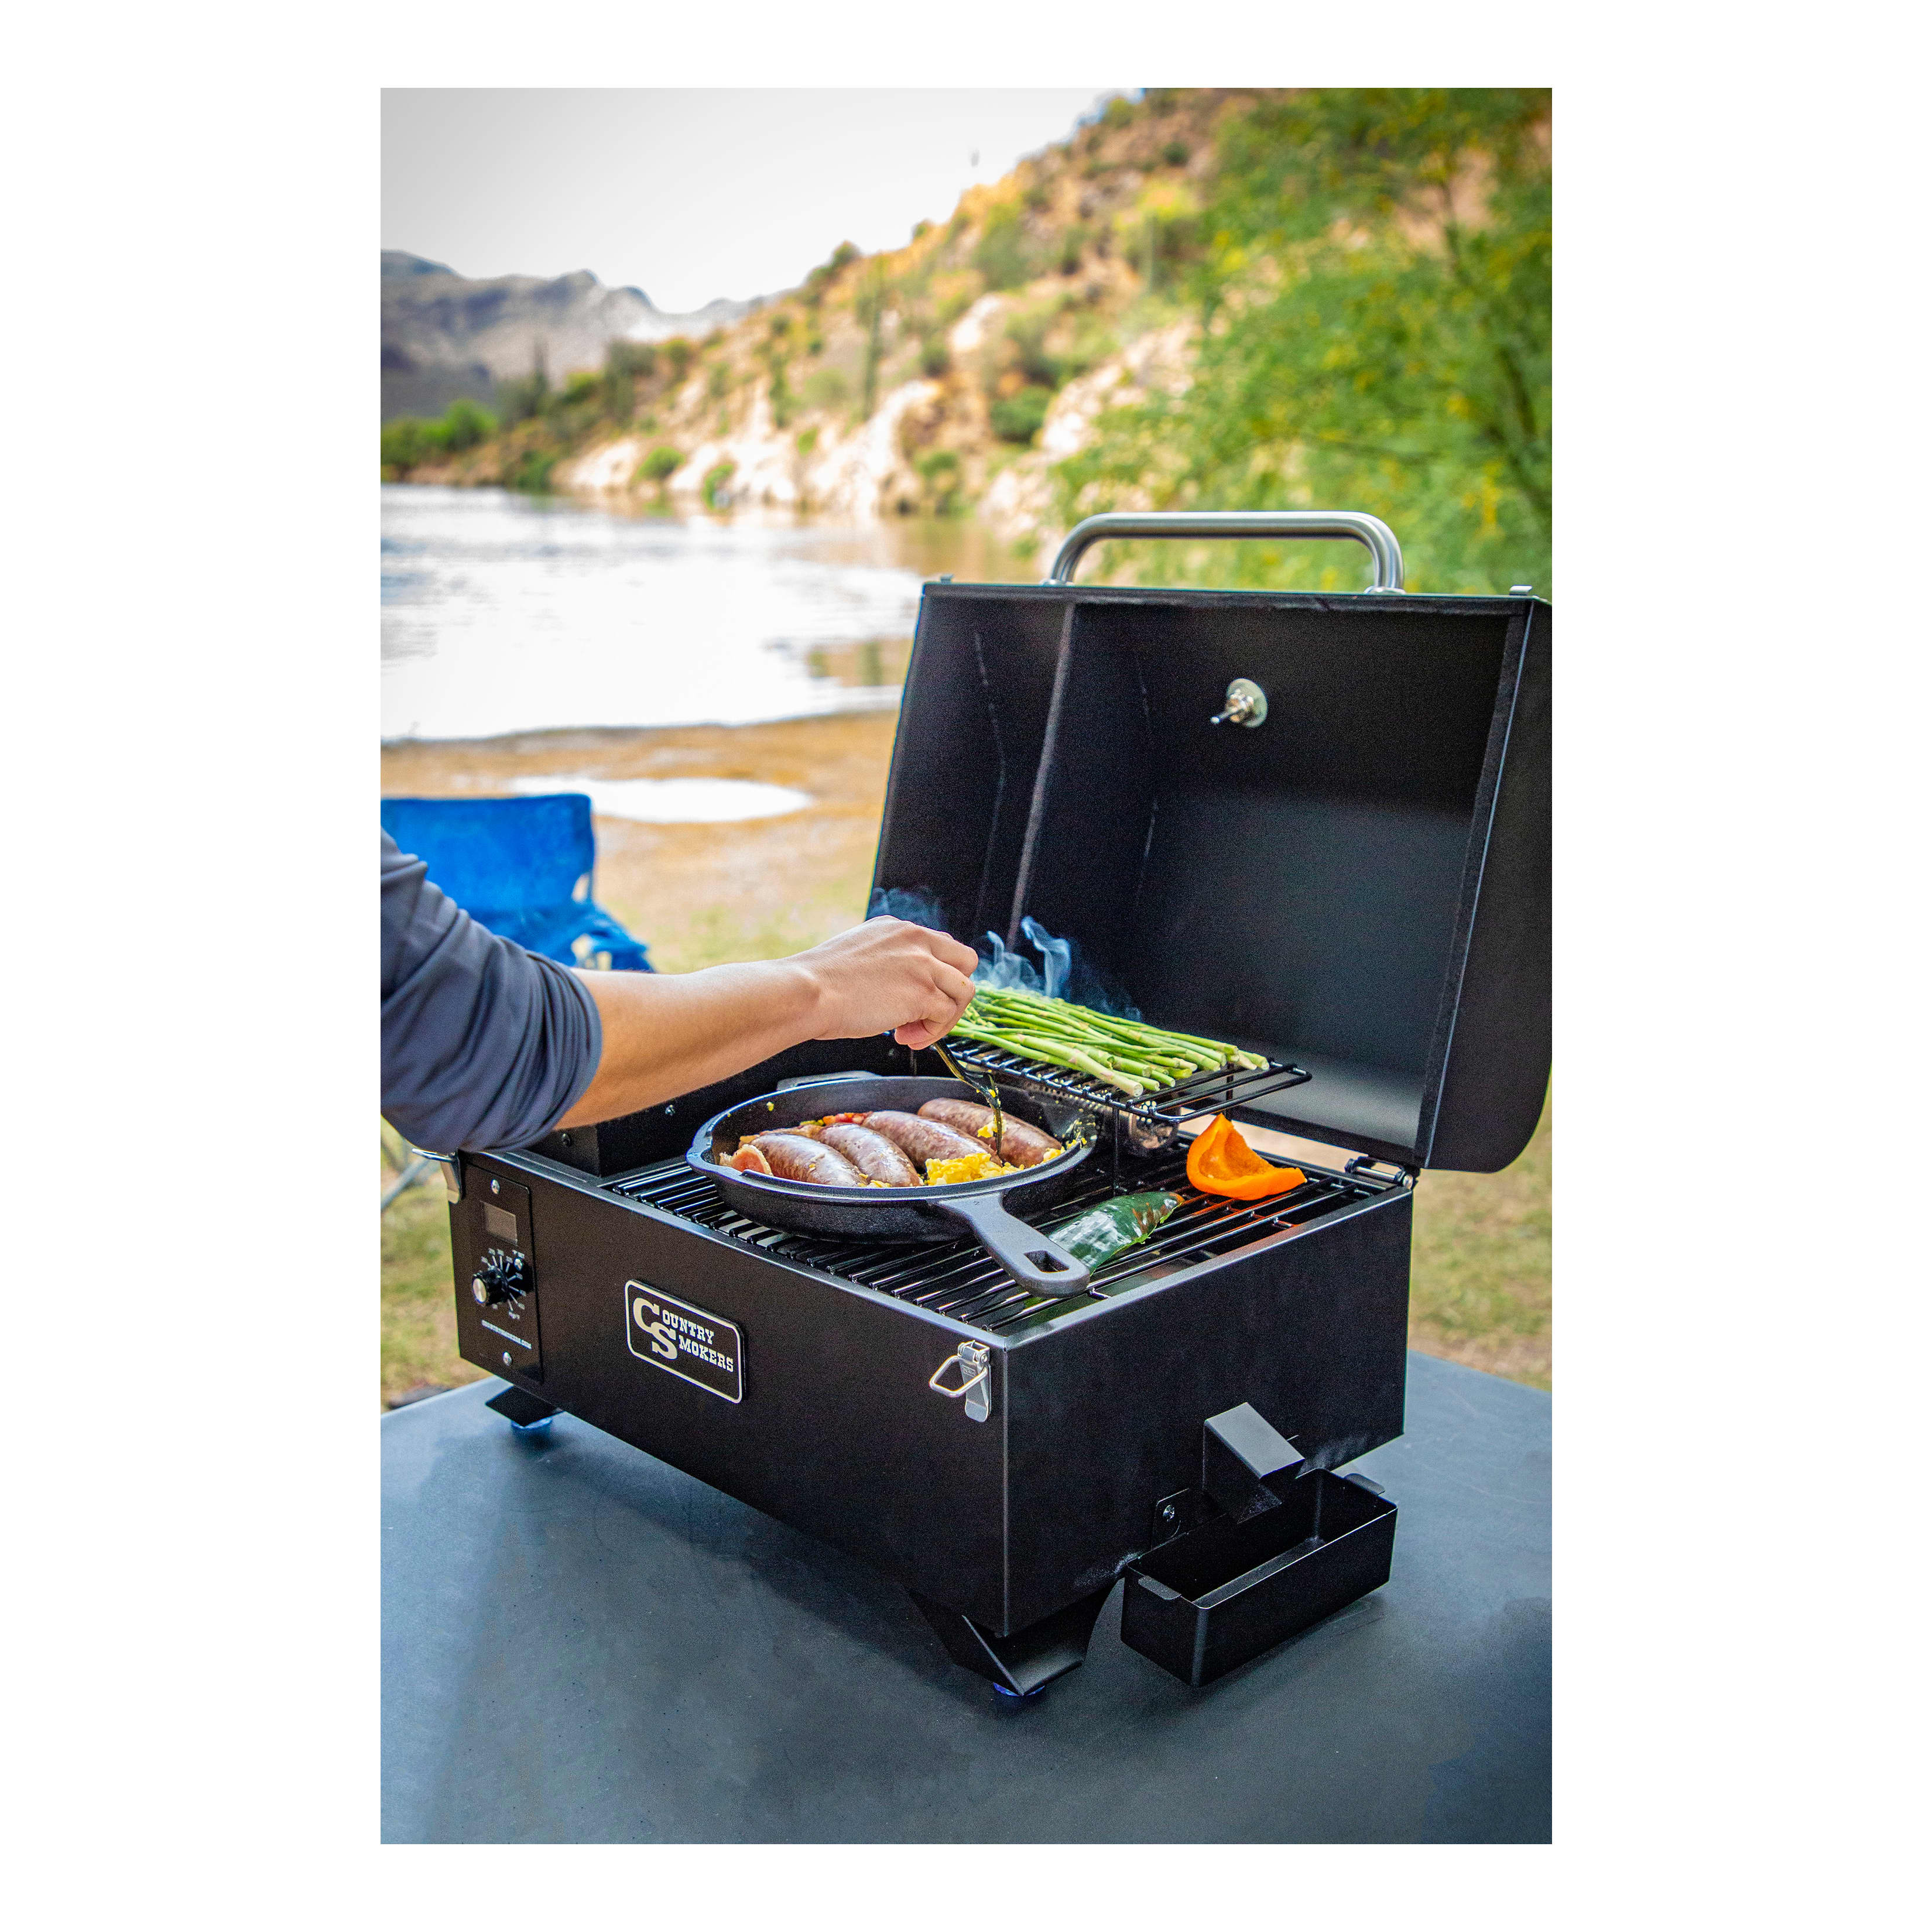 Country Smokers Traveler Portable Wood Pellet Grill & Smoker - in use